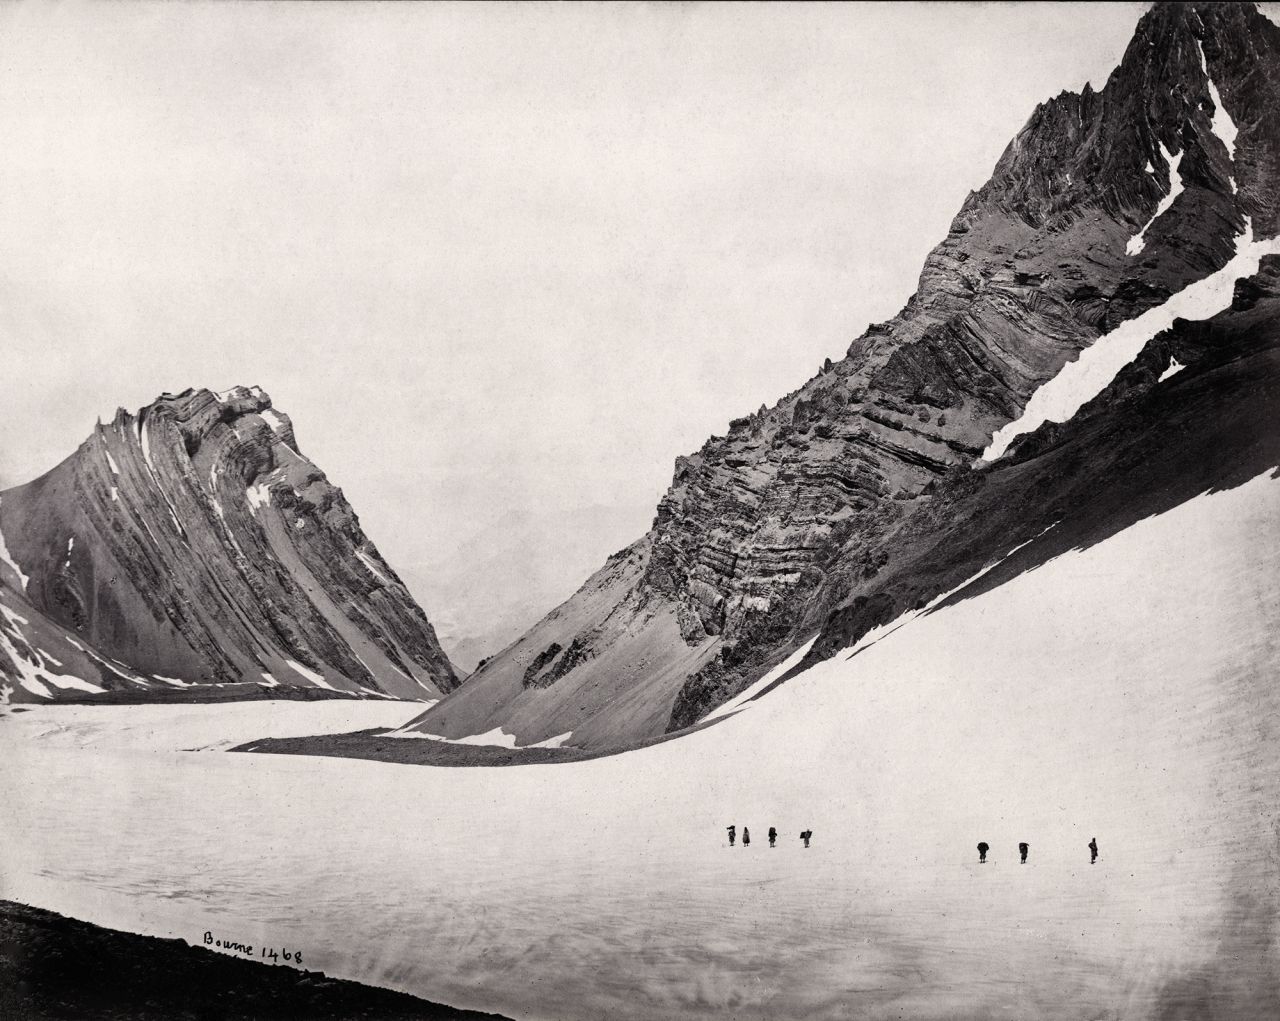 The Manirang pass, an early Himalayan trading route, photographed in 1866.